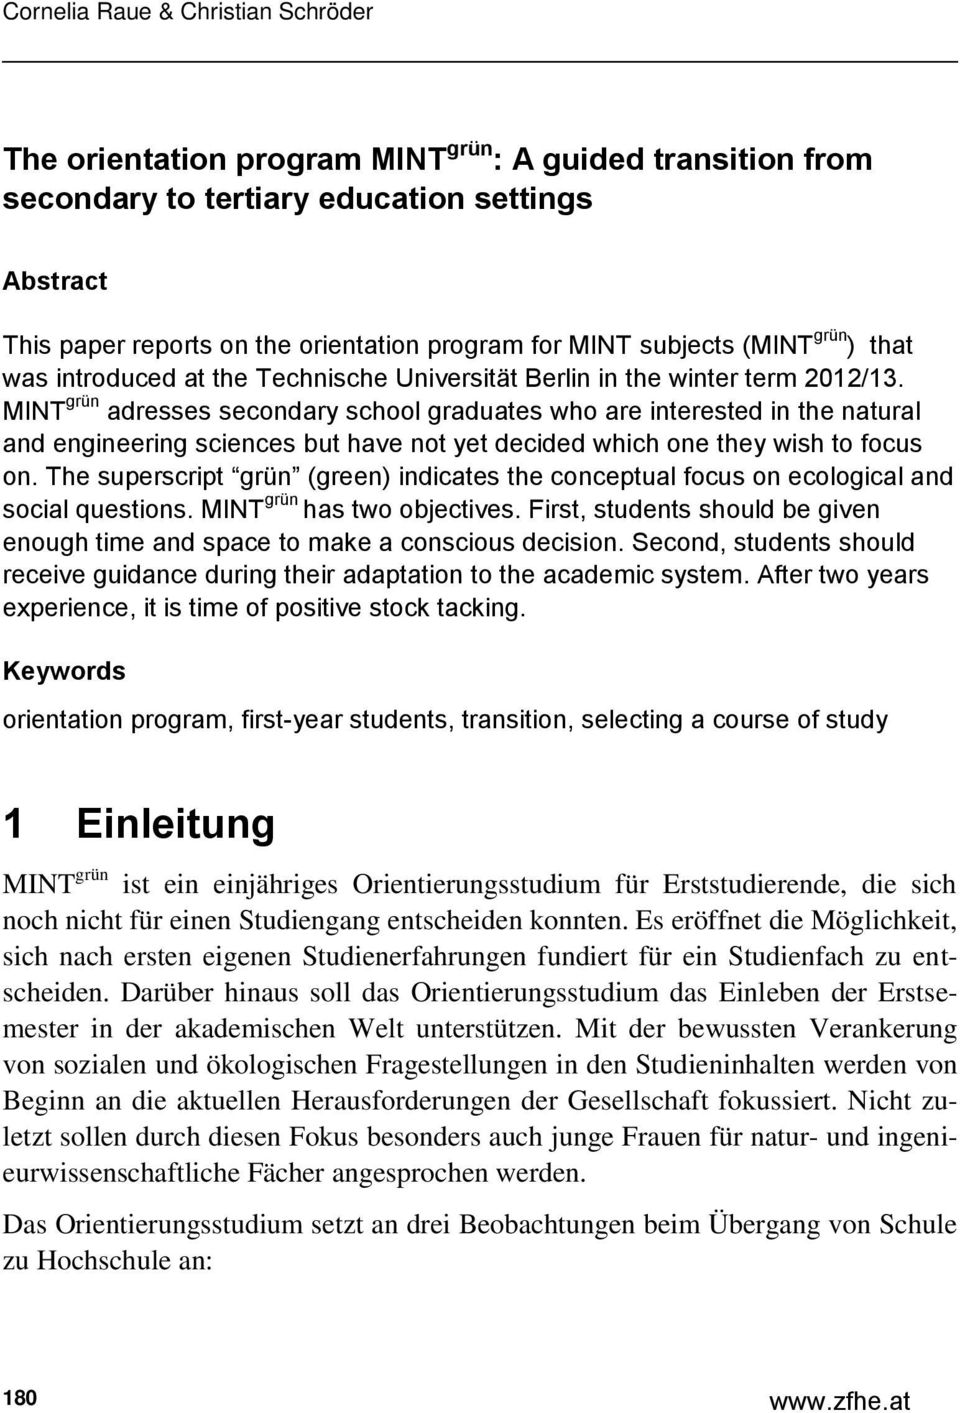 MINT grün adresses secondary school graduates who are interested in the natural and engineering sciences but have not yet decided which one they wish to focus on.